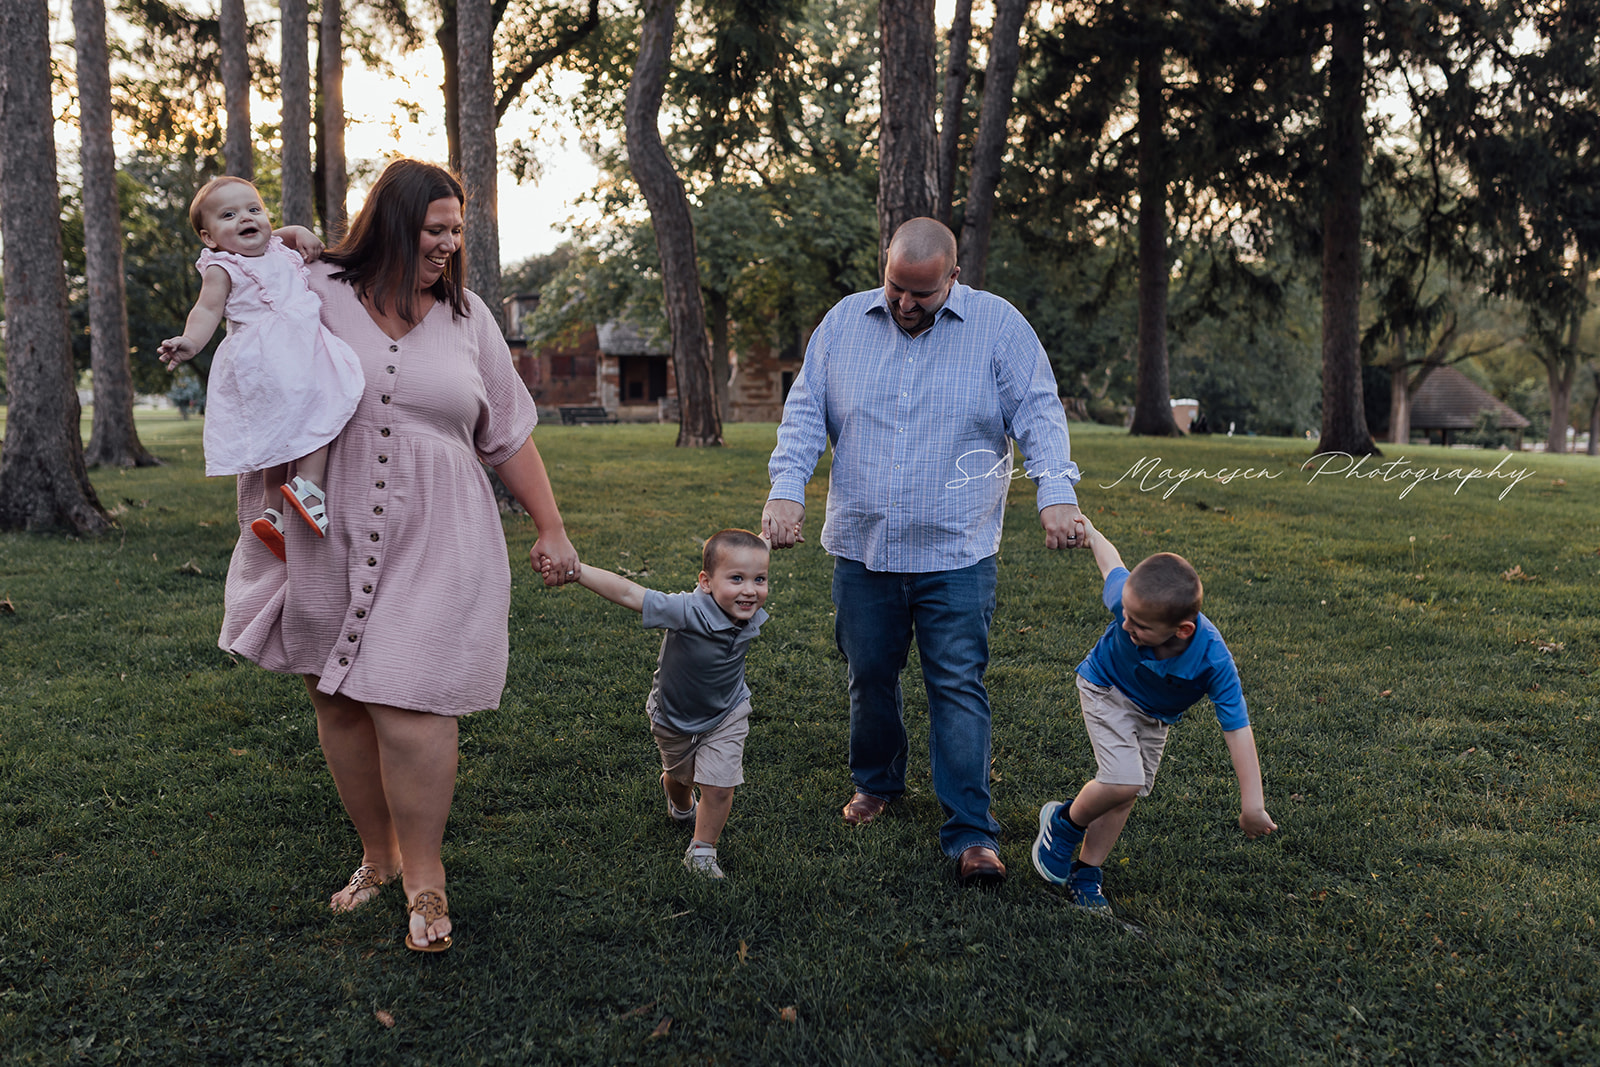 Outdoor family session near Naperville, IL with a dad, mom, two sons and one year old daughter at an old estate.